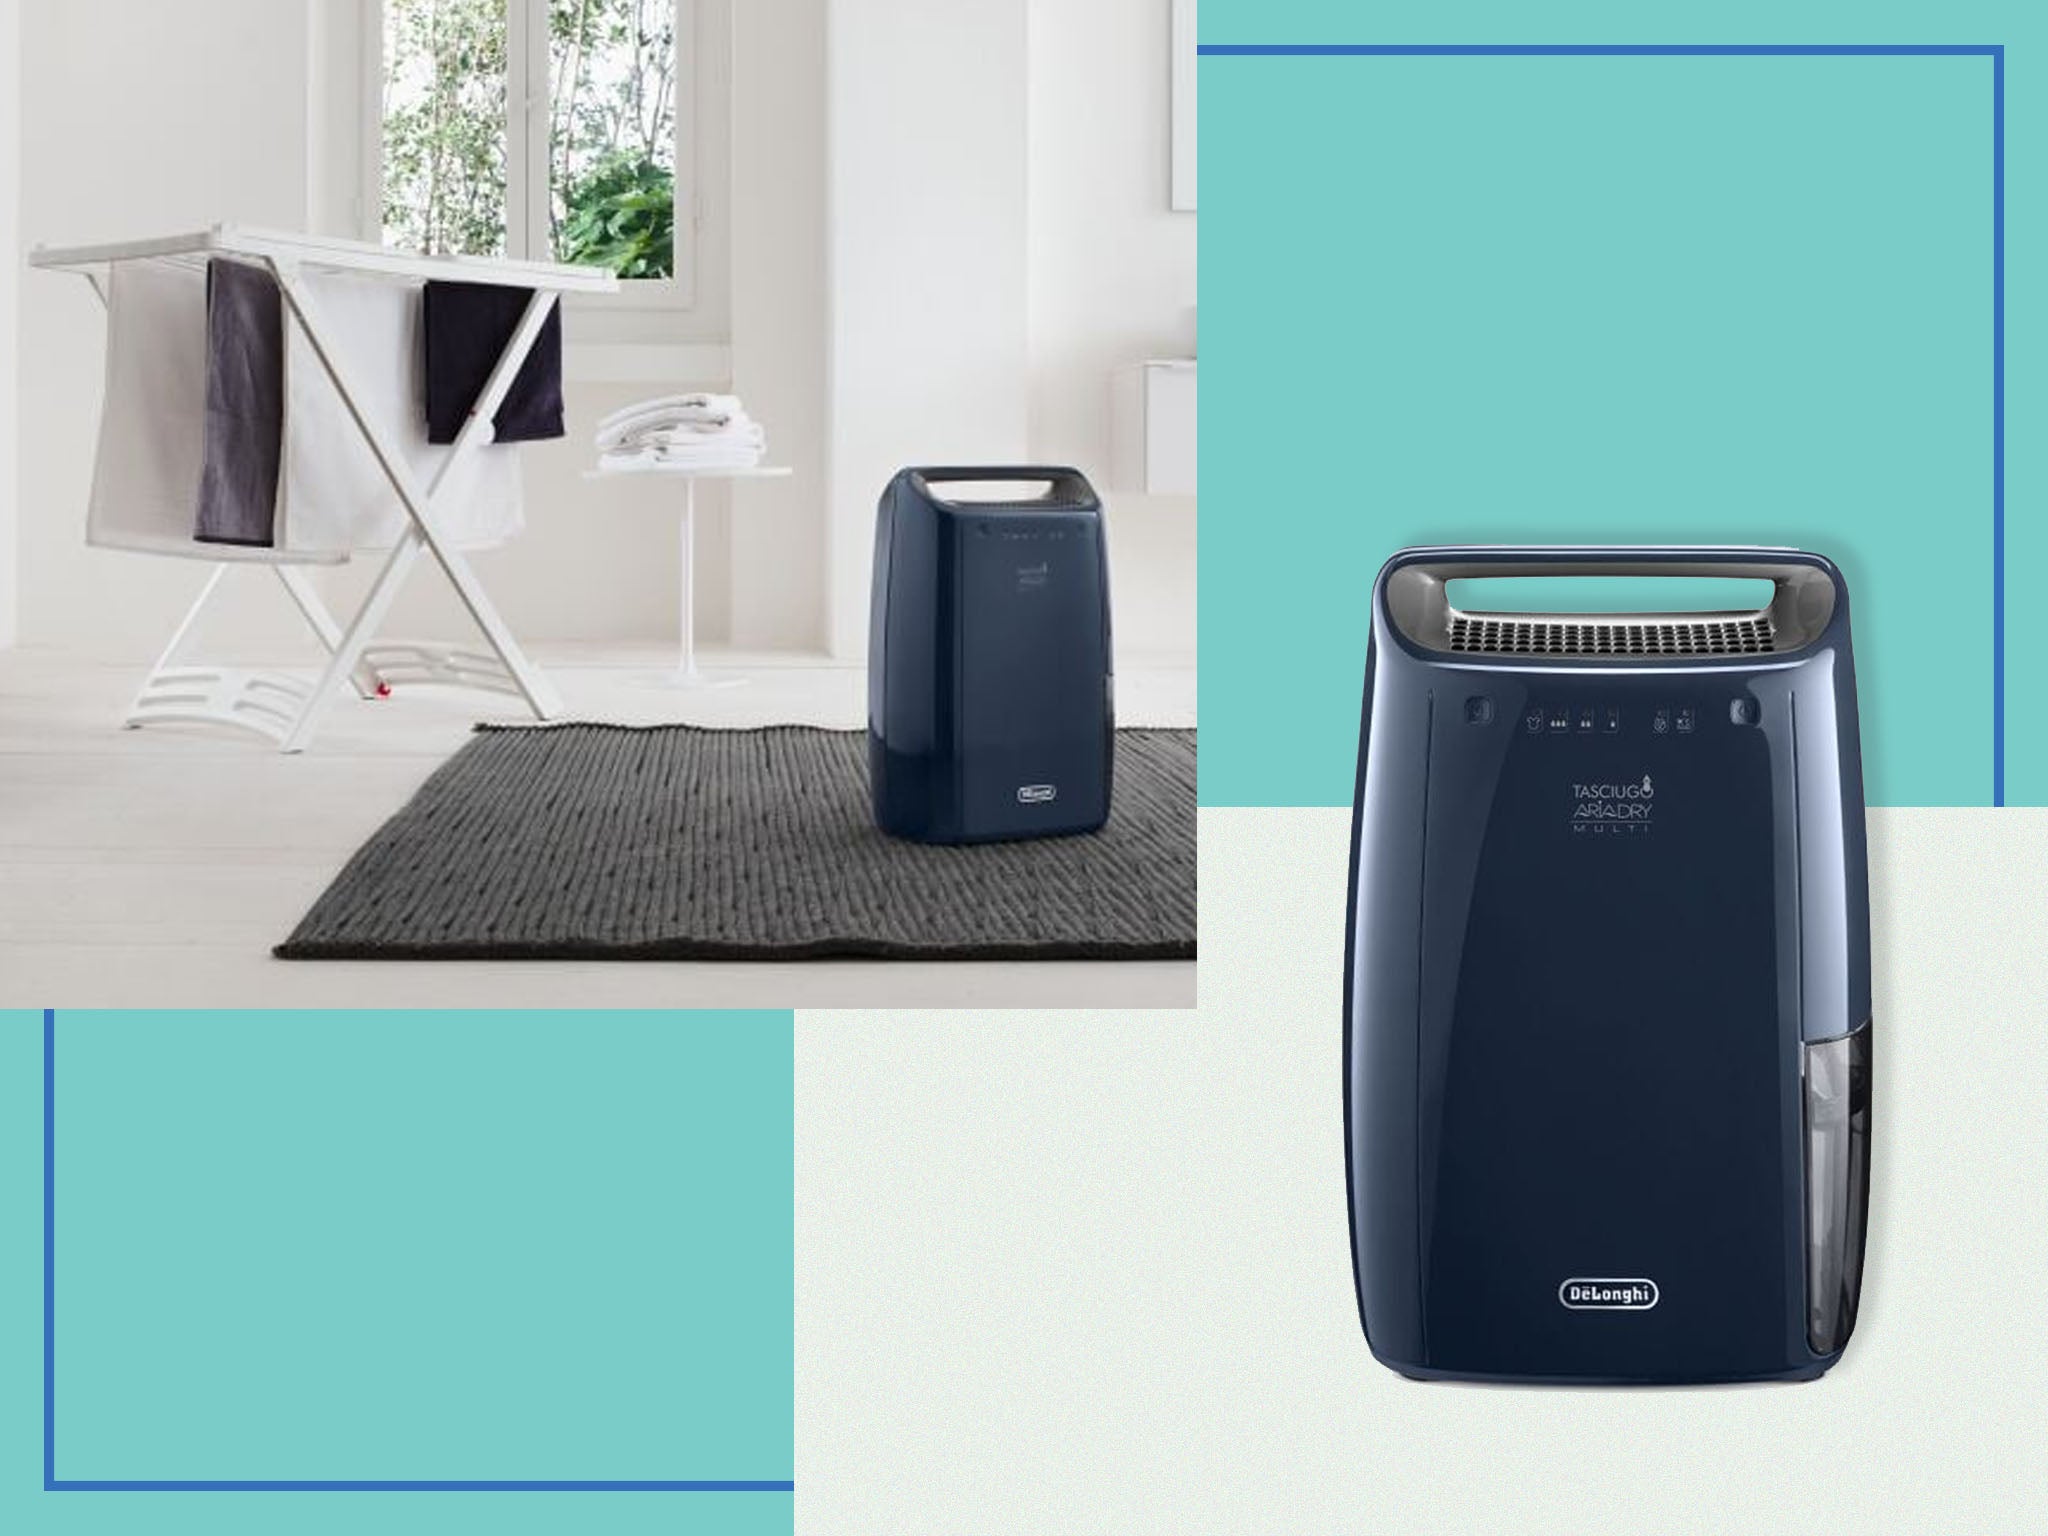 De’Longhi’s energy-efficient dehumidifier could cut the drying time for your clothes in half this winter